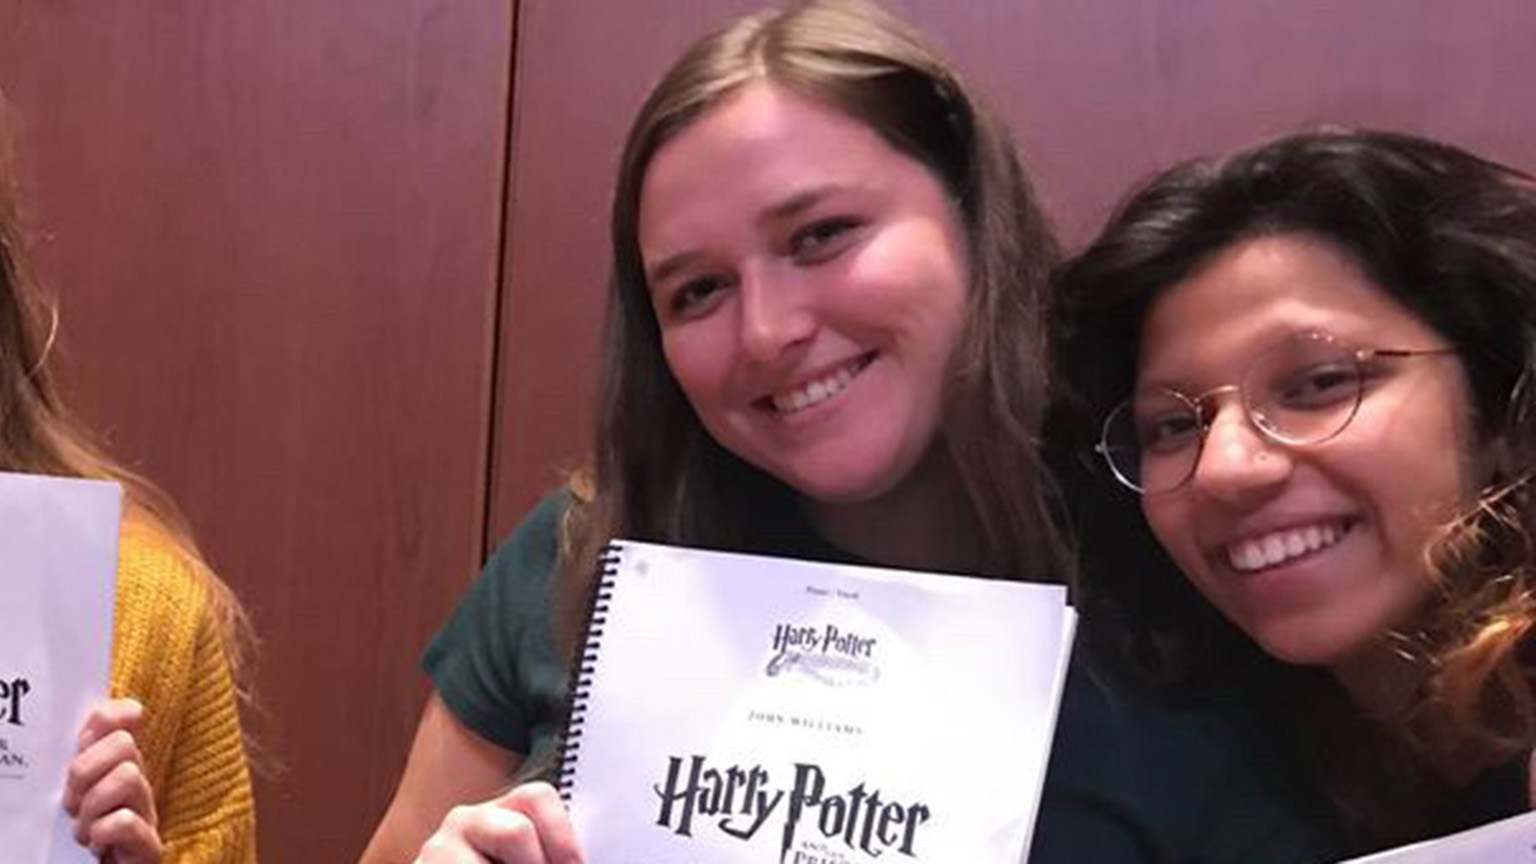 Kate Bosen posing with the score to Harry Potter and the Prisoner of Azkaban